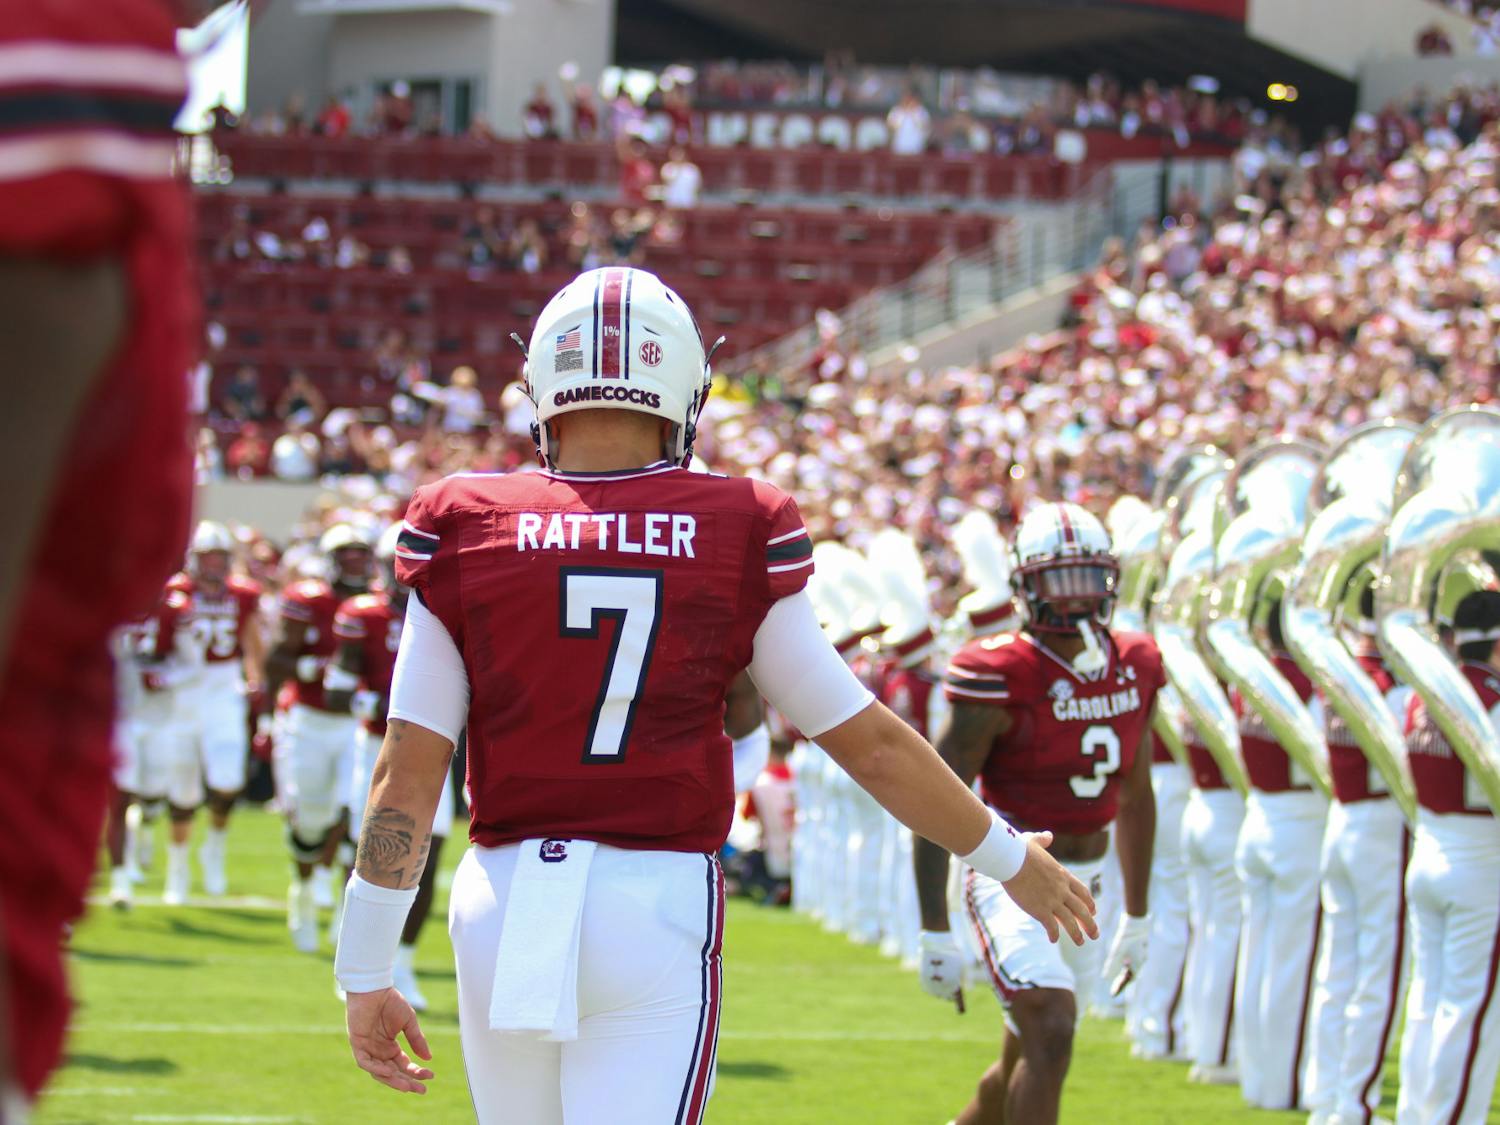 FILE—Spencer Rattler makes his way onto the field at the start of the Gamecock's game against the Georgia Bulldogs on Sept. 17, 2022. Georgia defeated South Carolina 48-7.